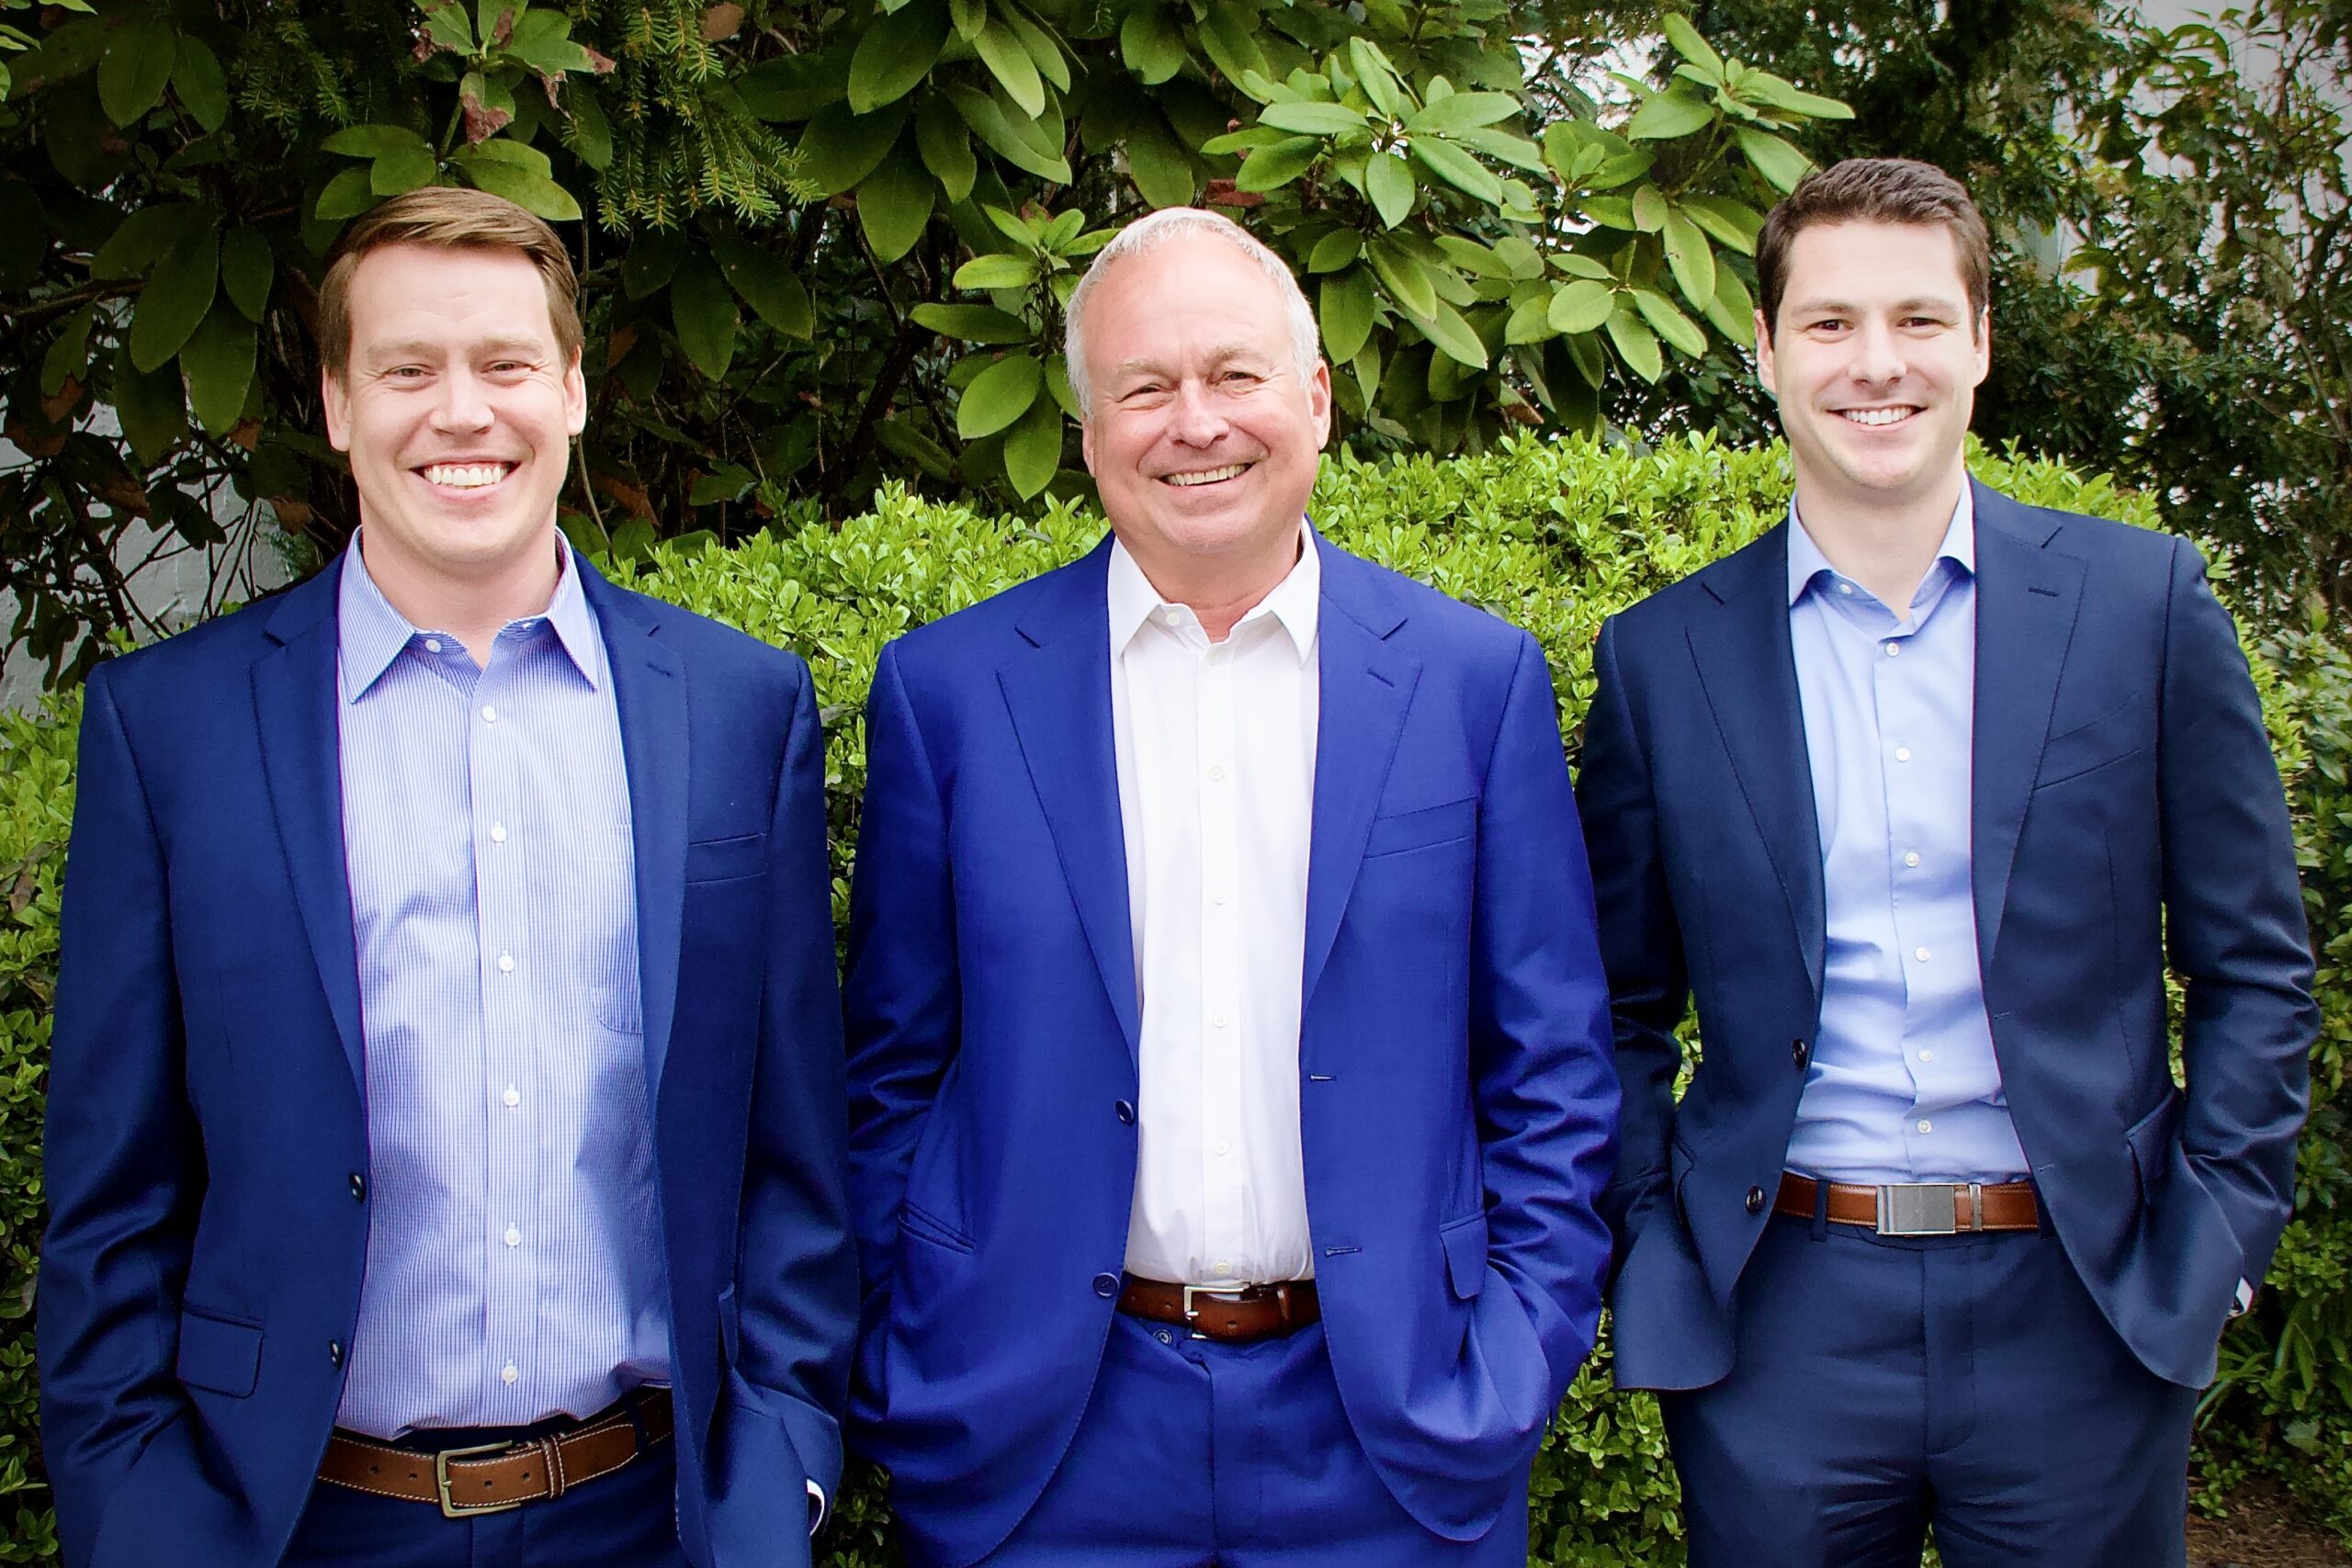 Seattle’s Timberlane Partners Lands Top-Producing Real Estate Veteran From CBRE, Key Leaders From Northmarq and Security Properties